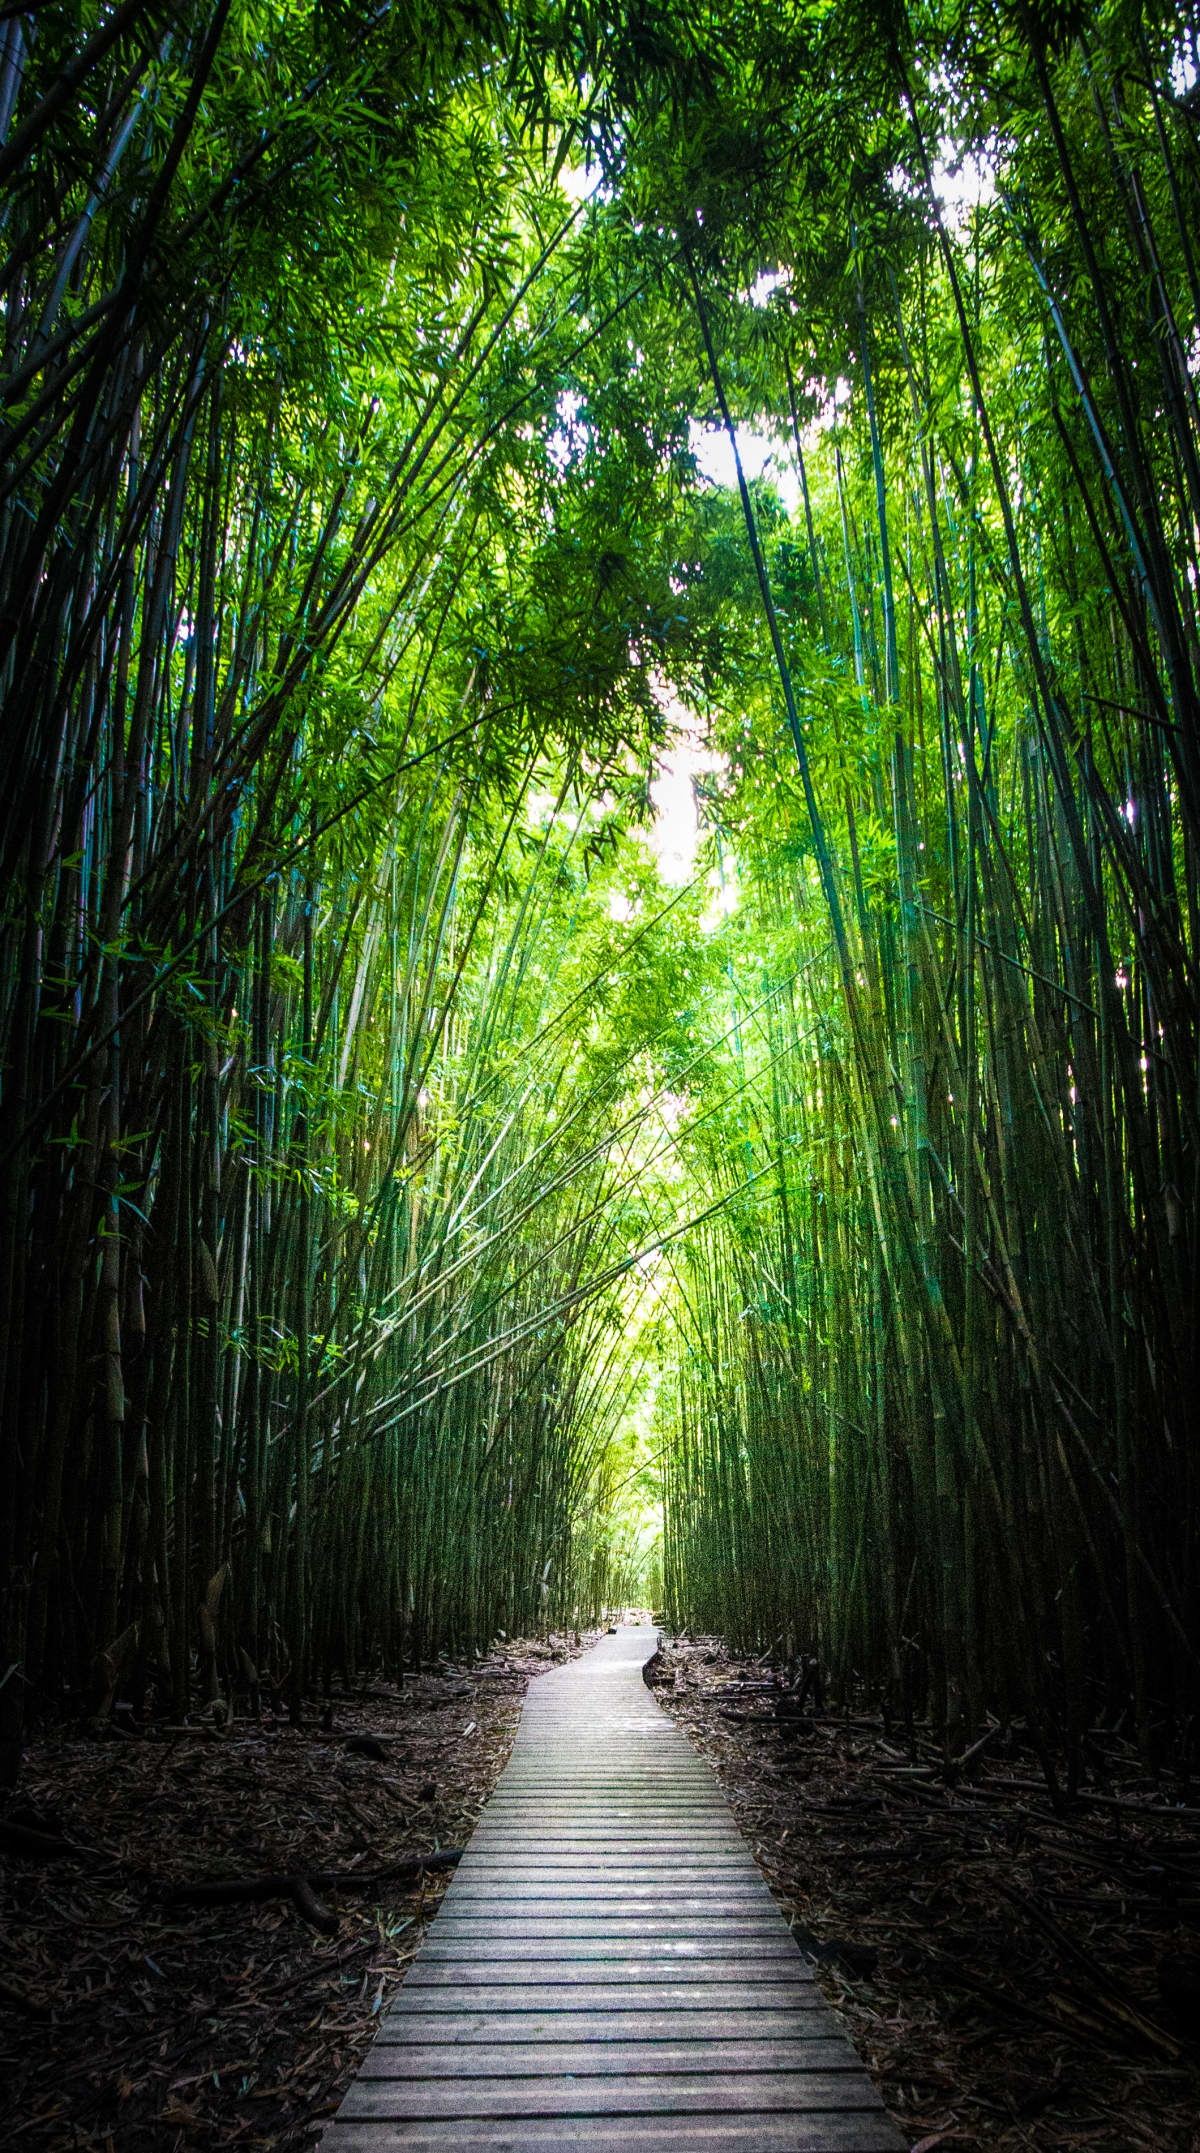 Walking path inside the Bamboo Forest on the island of Maui